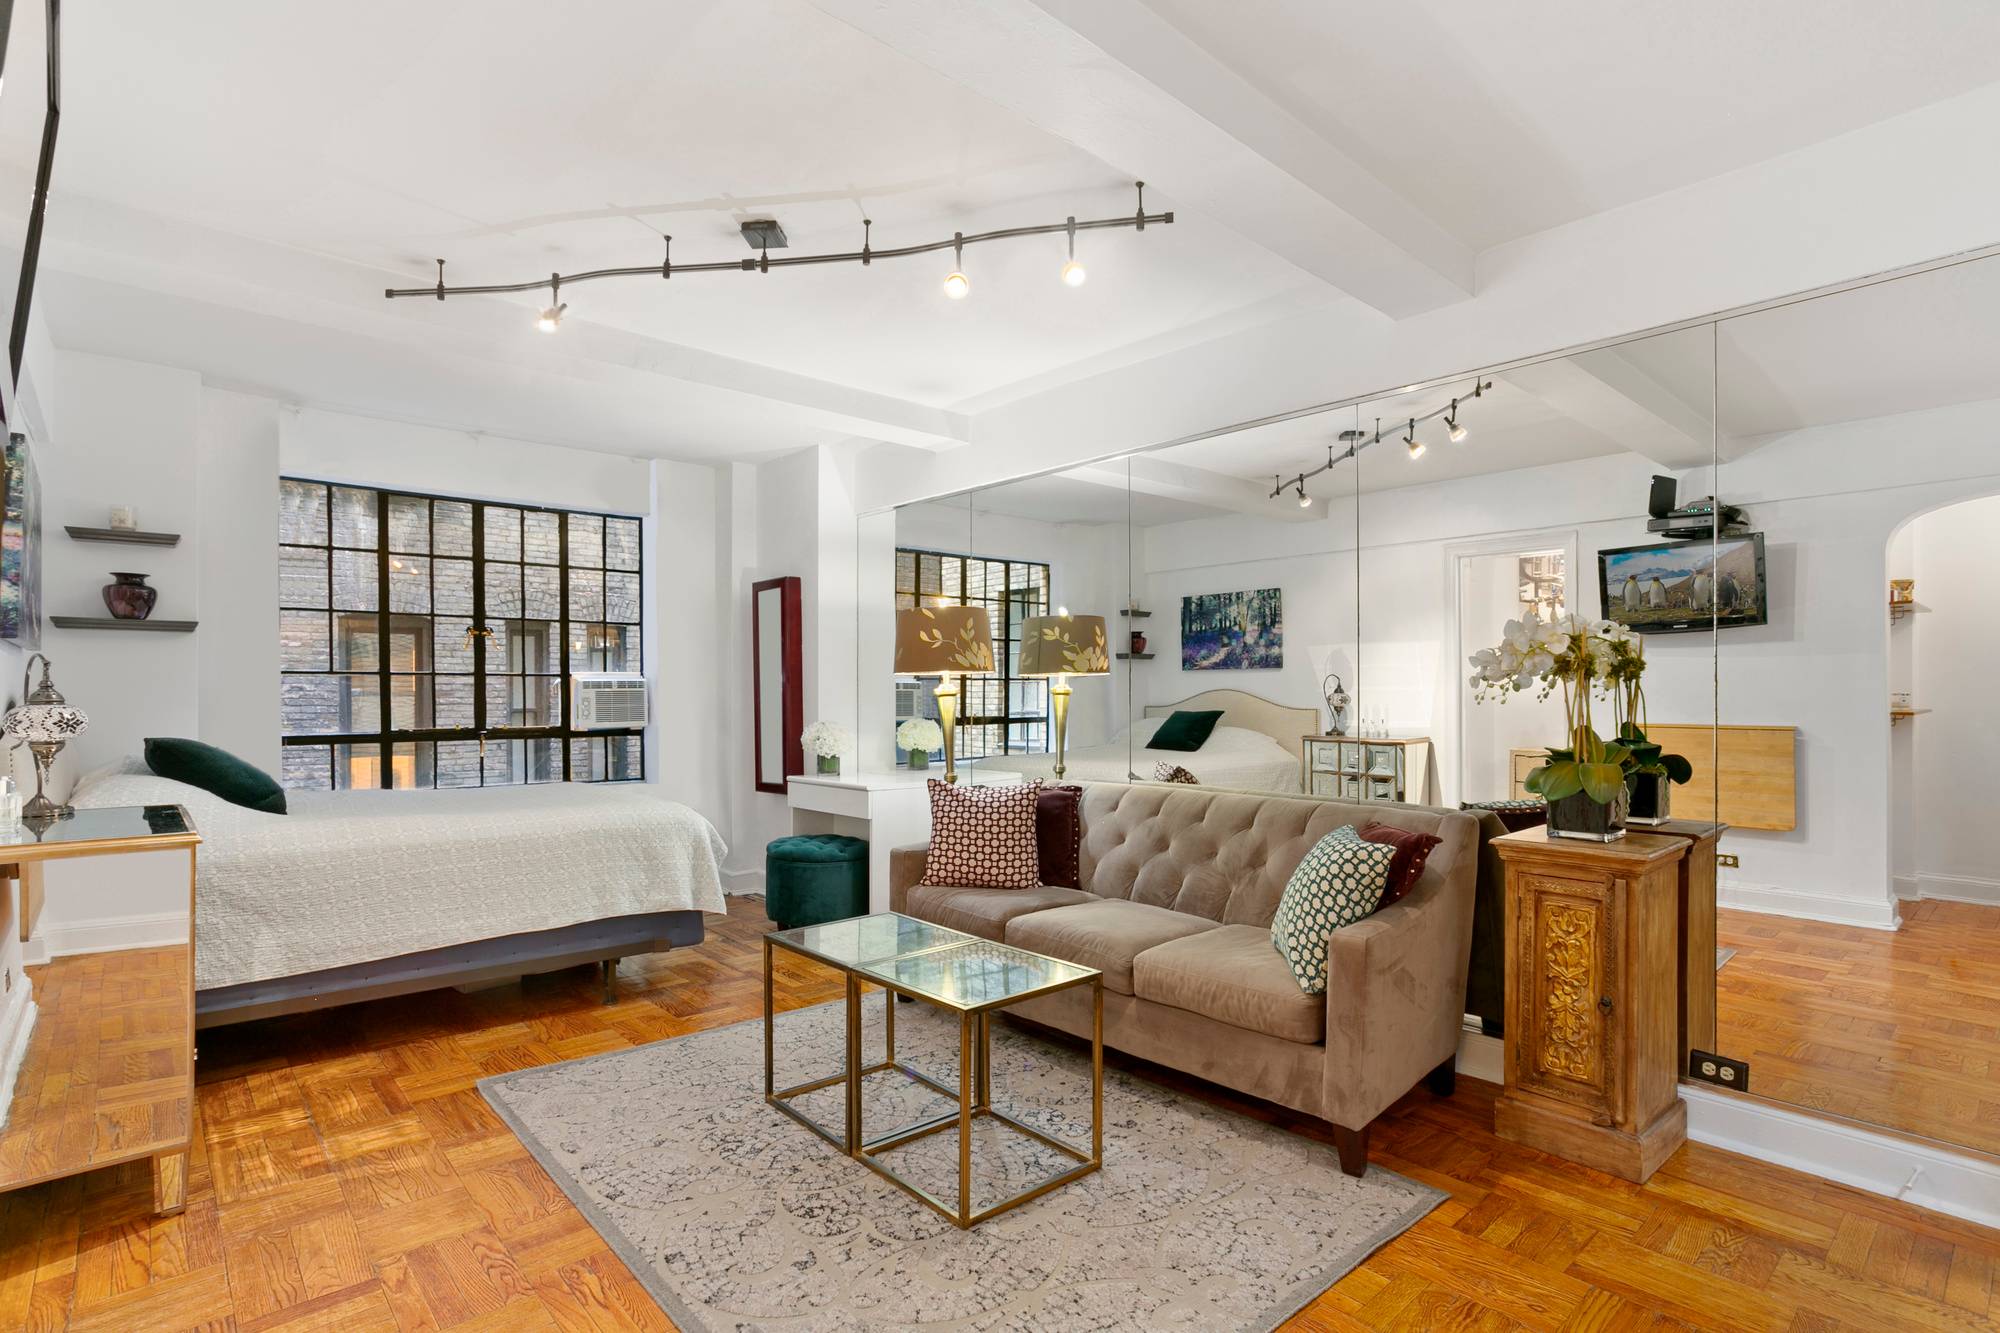 This charming boutique prewar co op east facing studio apartment is officially on the market, making it the best studio with the greatest value on this side of 5th Avenue.